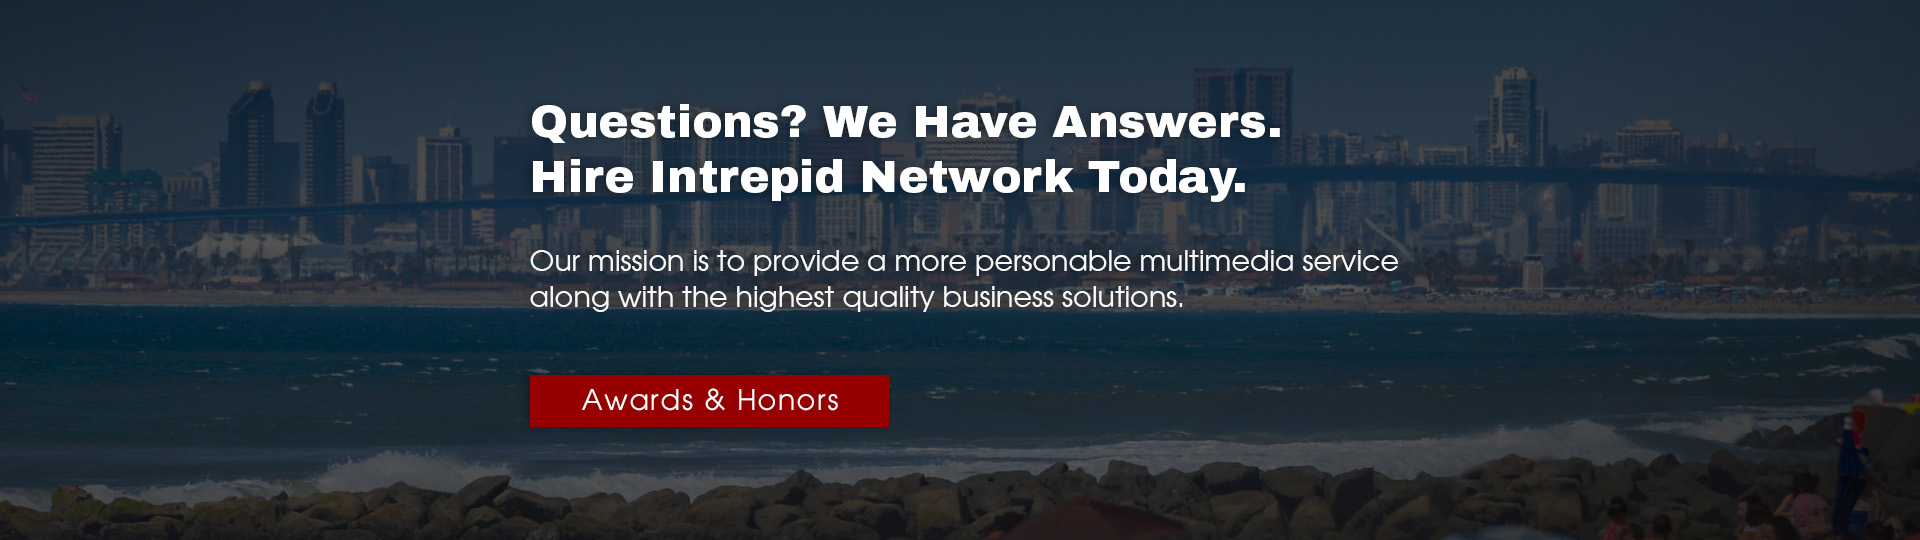 Intrepid Network Provides Answers